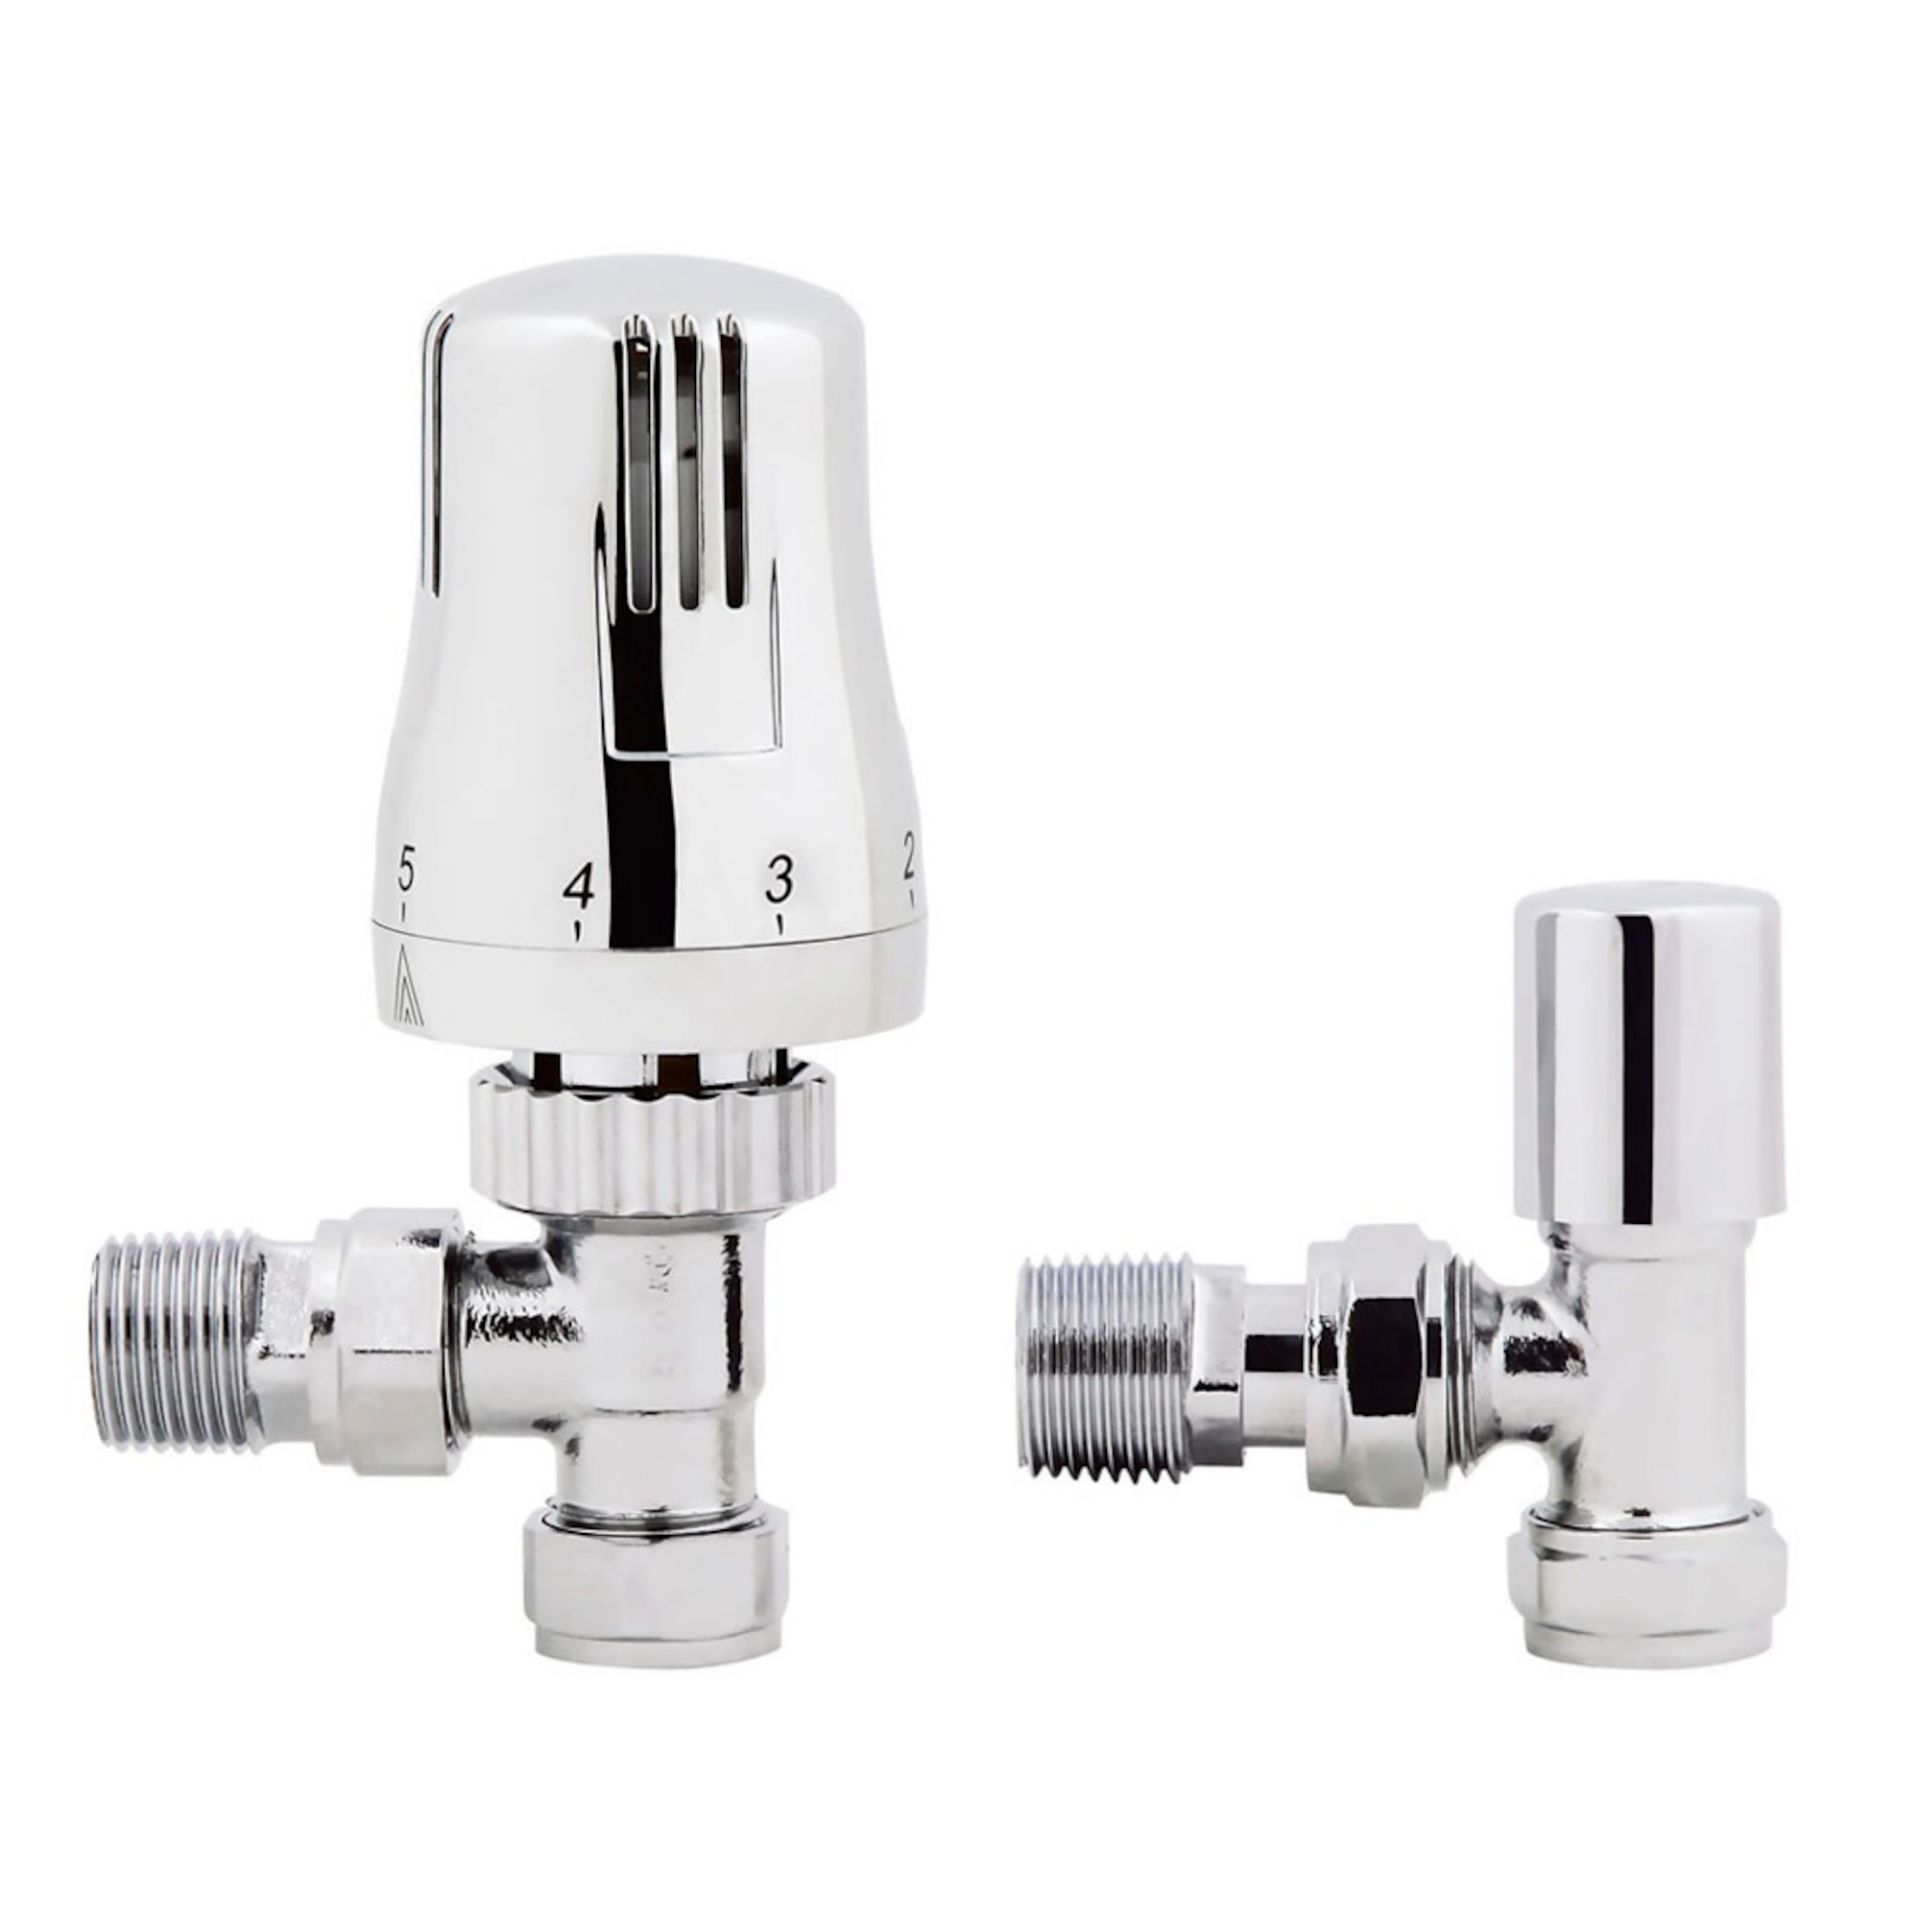 (MP62) 15mm Standard Connection Thermostatic Angled Chrome Radiator Valves Chrome Plated Solid Brass - Image 2 of 3